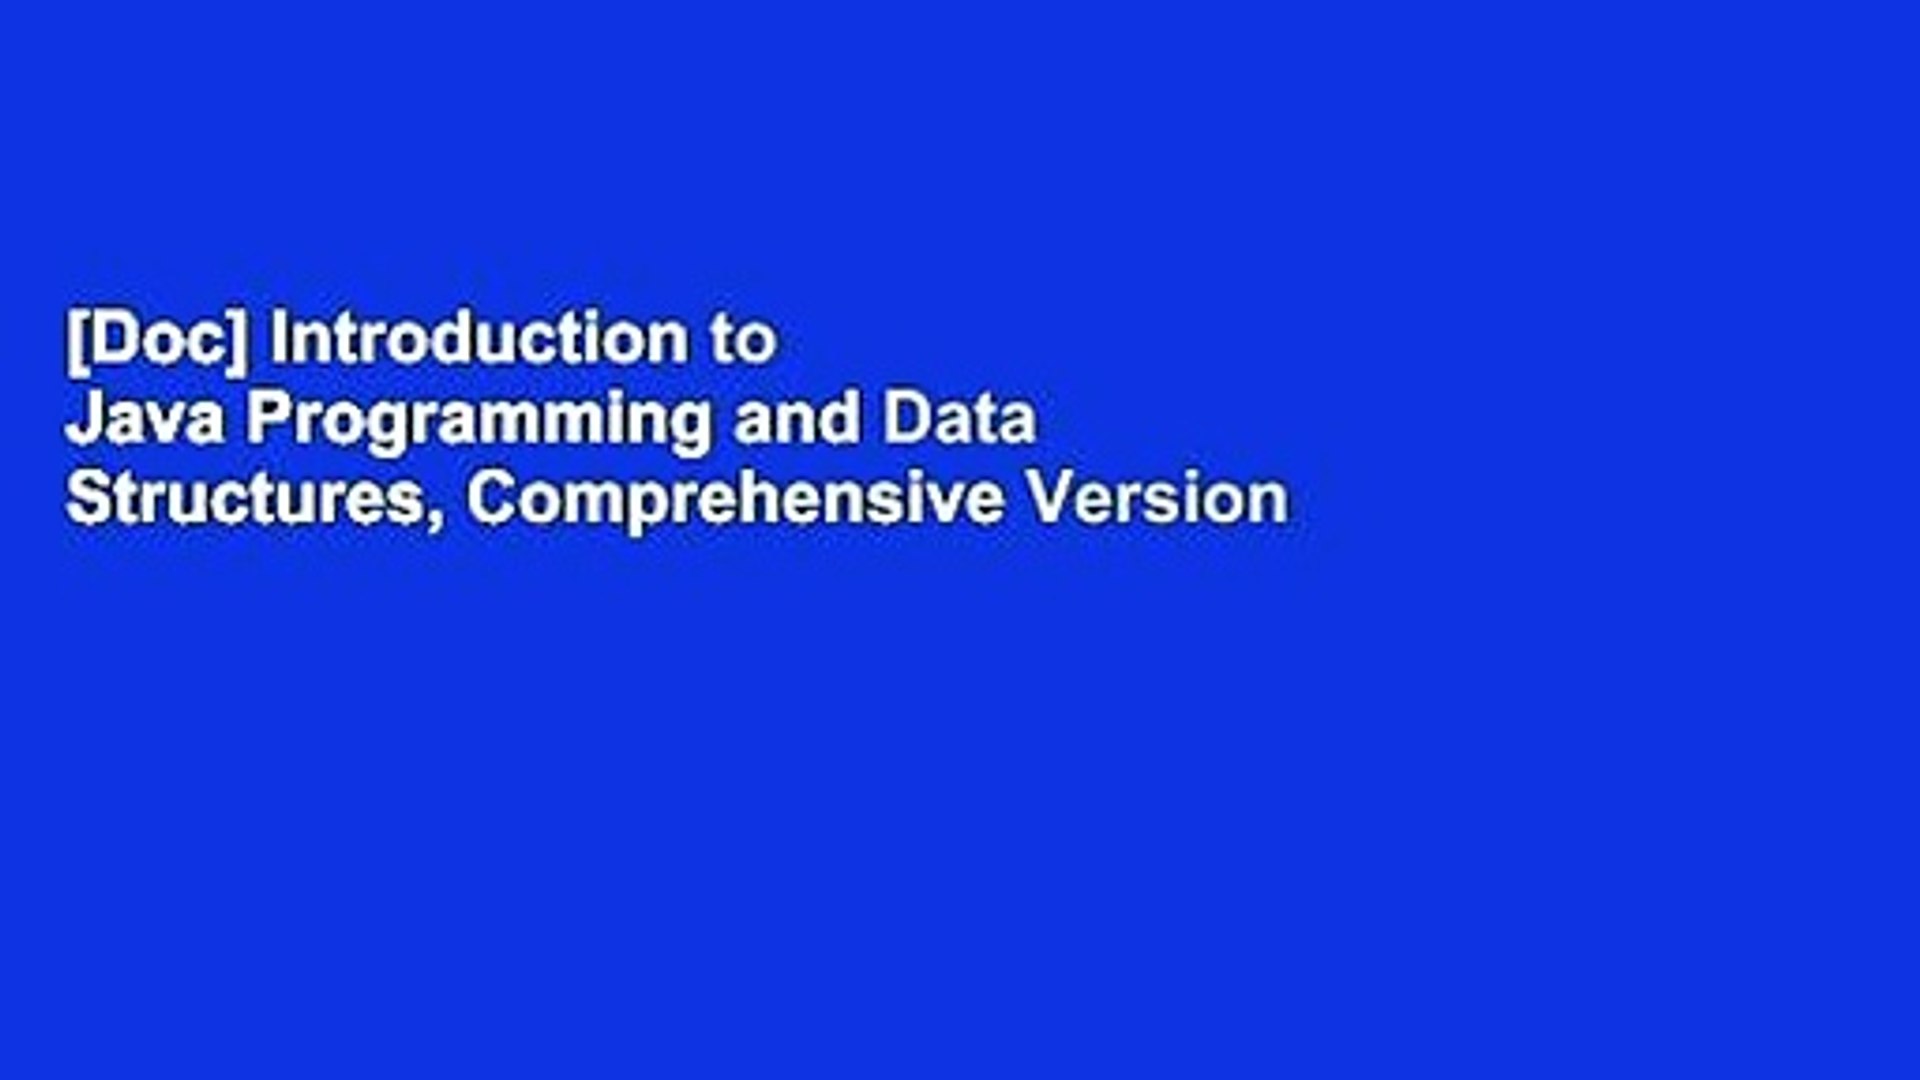 [Doc] Introduction to Java Programming and Data Structures, Comprehensive Version